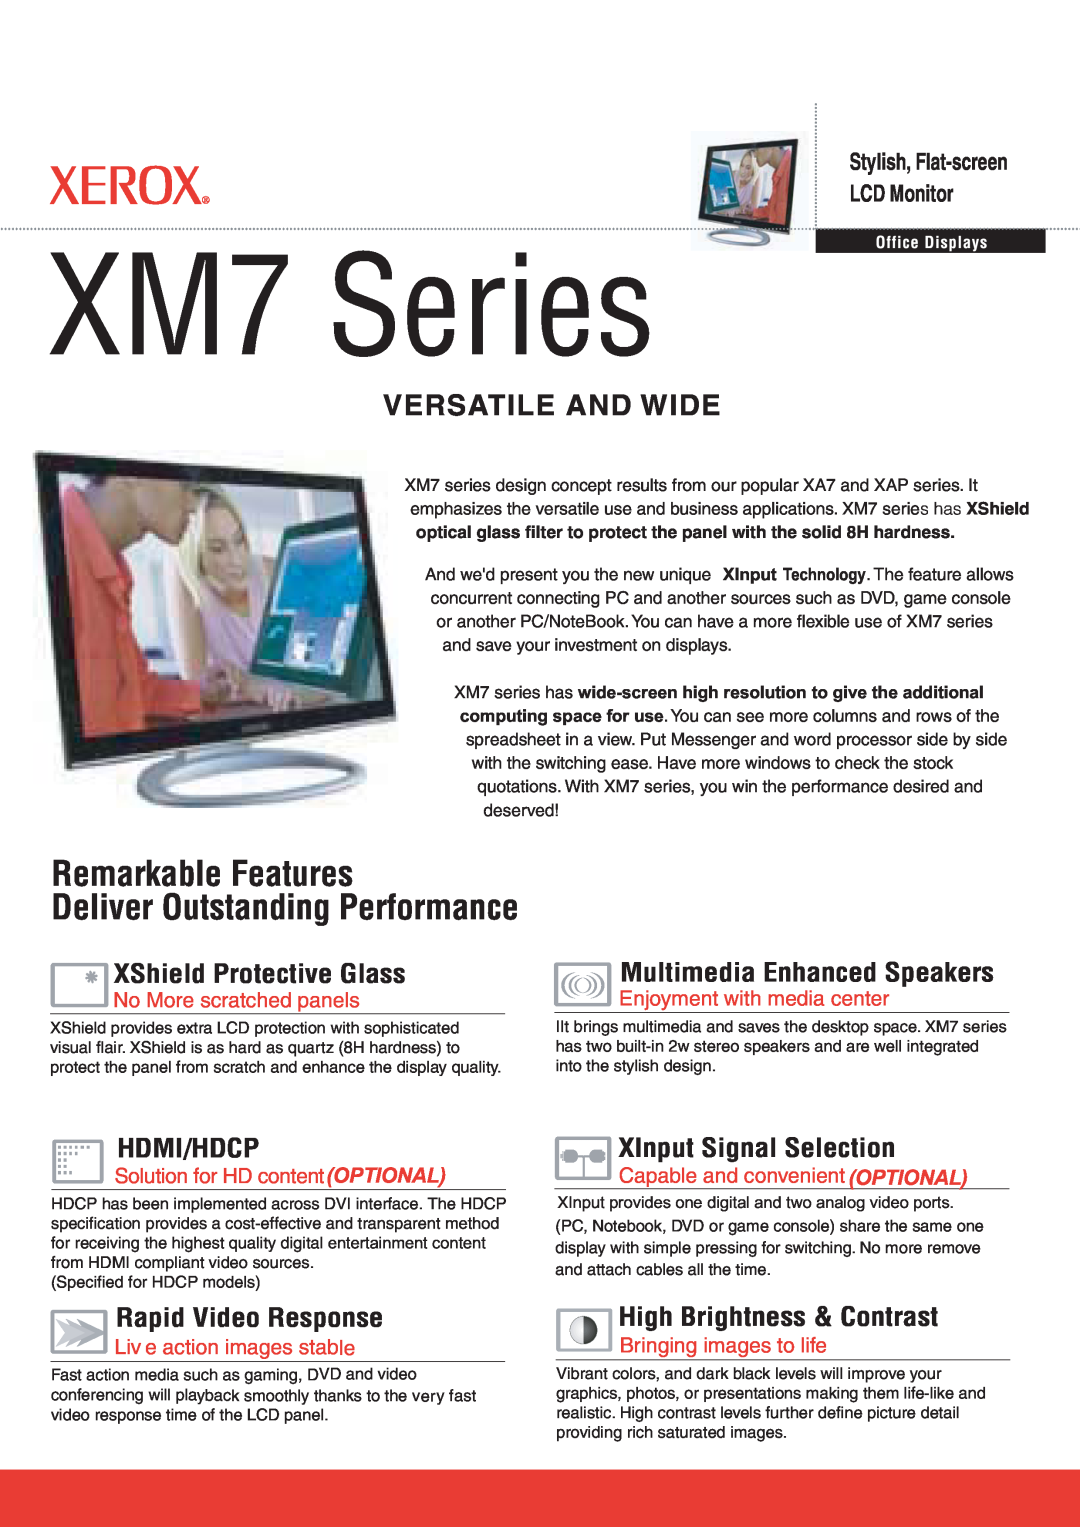 Xerox XM7 Series manual Remarkable Features Deliver Outstanding Performance, Versatile And Wide, XShield Protective Glass 